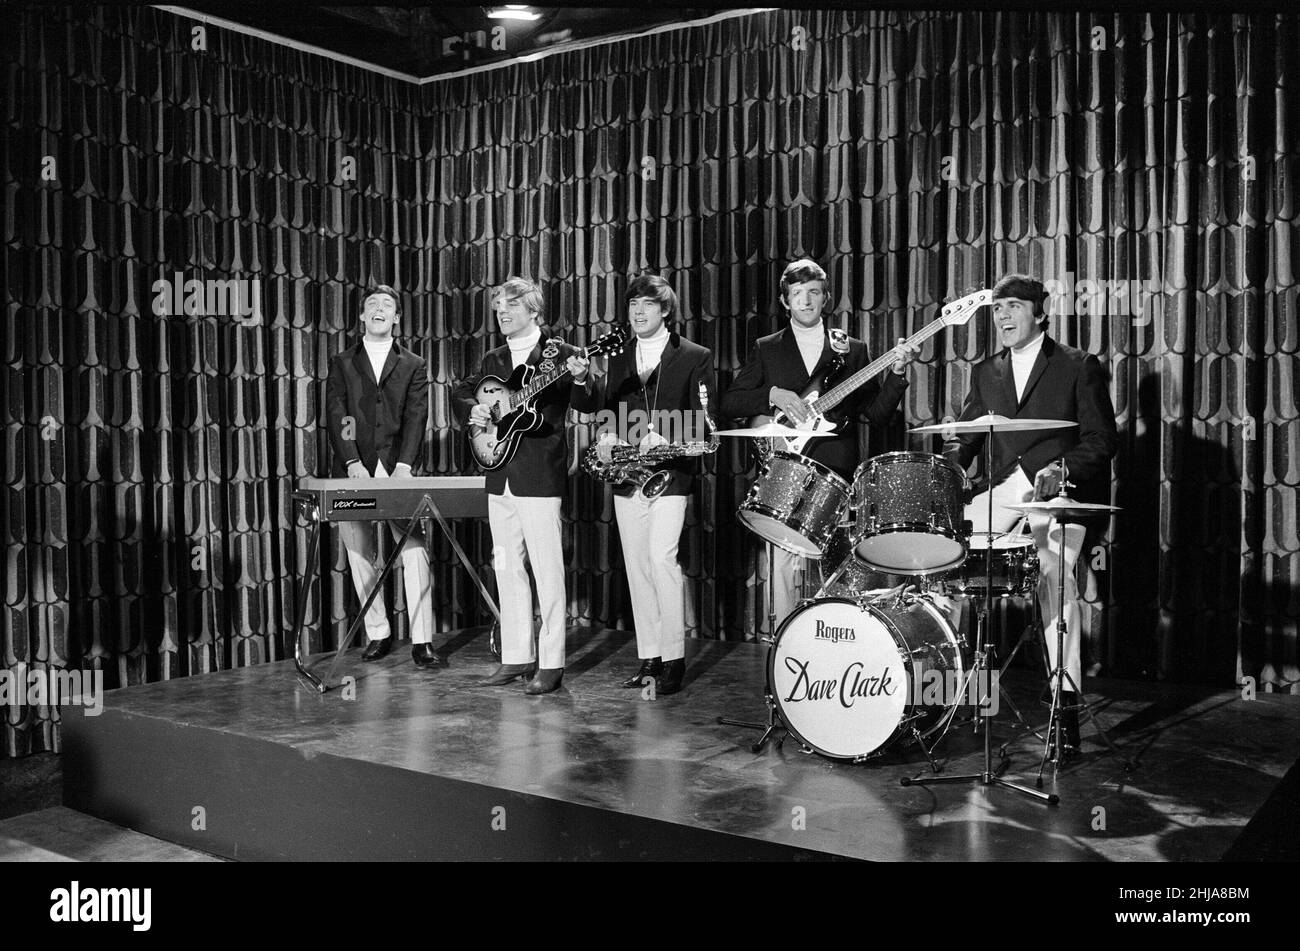 The Dave Clarke Five filming at MGM's Boreham Wood studio in Hertfordshire, for the new romantic musical comedy 'The Go Go Set' Left to right: Mike Smith (lead vocals and keyboards organ) Lenny Davison (guitar) Denis Patton (saxophone) Rick Huxley (bass guitar) Dave Clark (drums)  Picture taken 2nd September 1964 Stock Photo